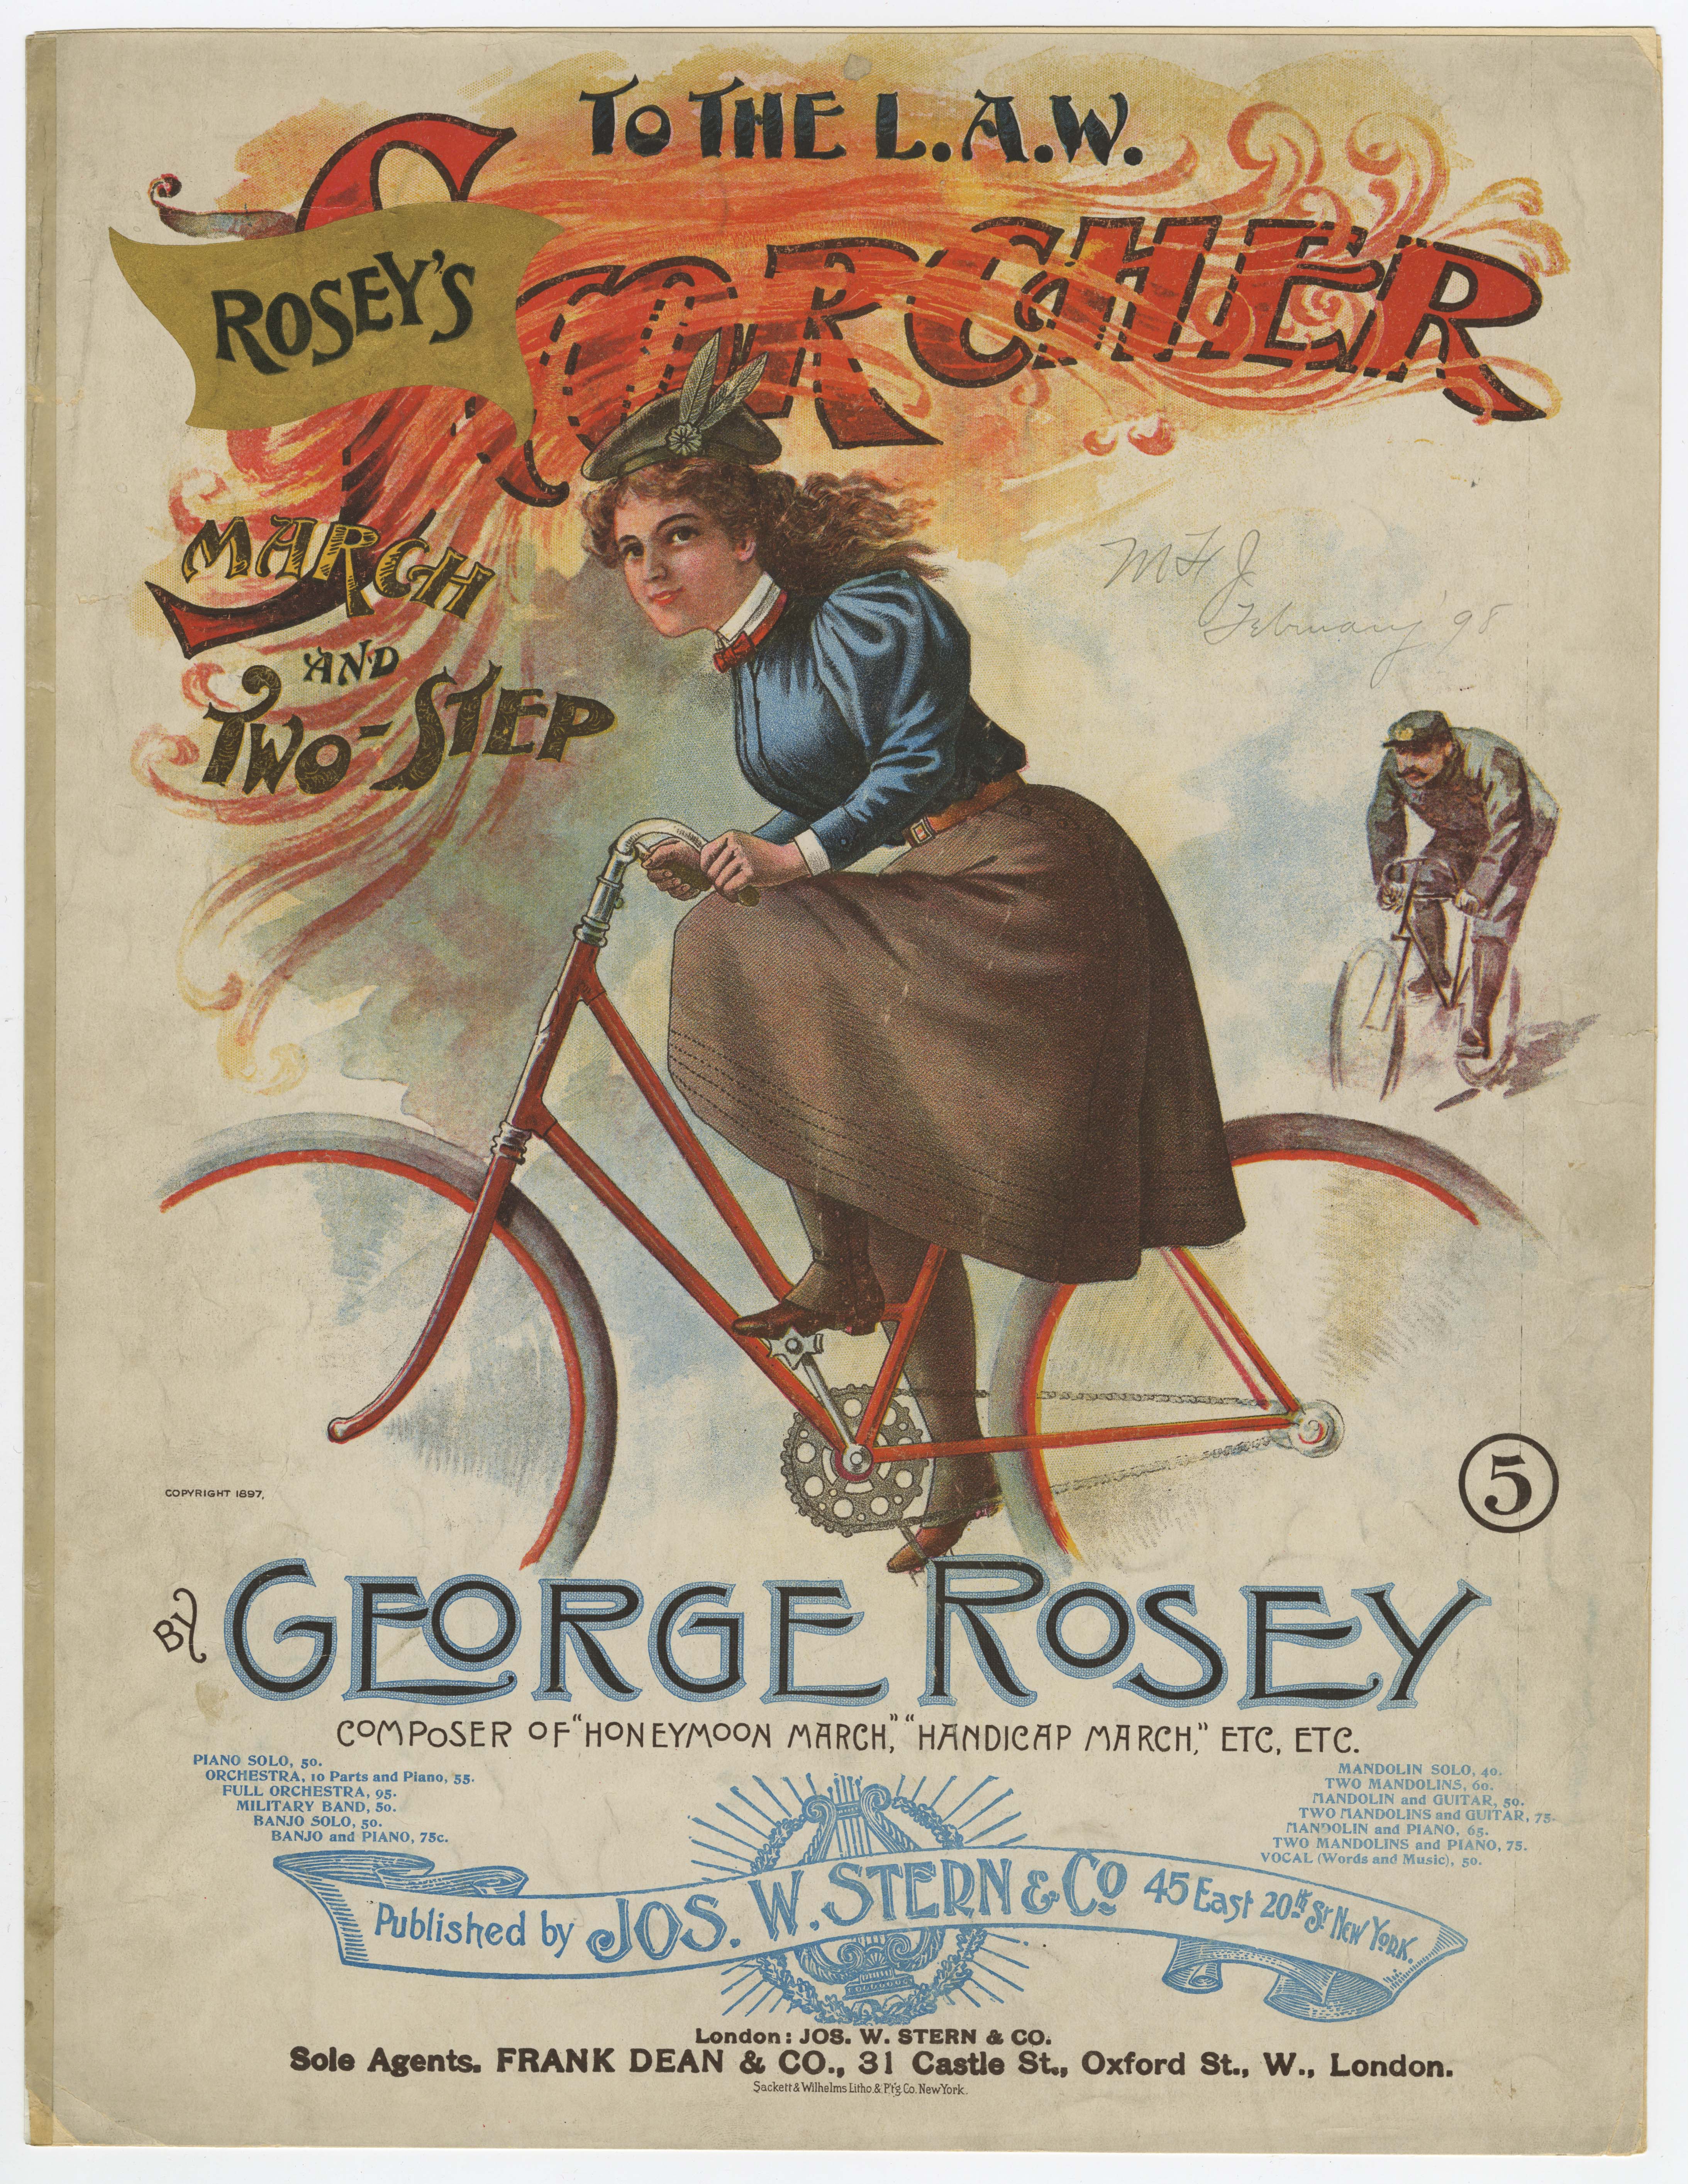 Image of a woman riding a bicycle, wearing 19th century clothing